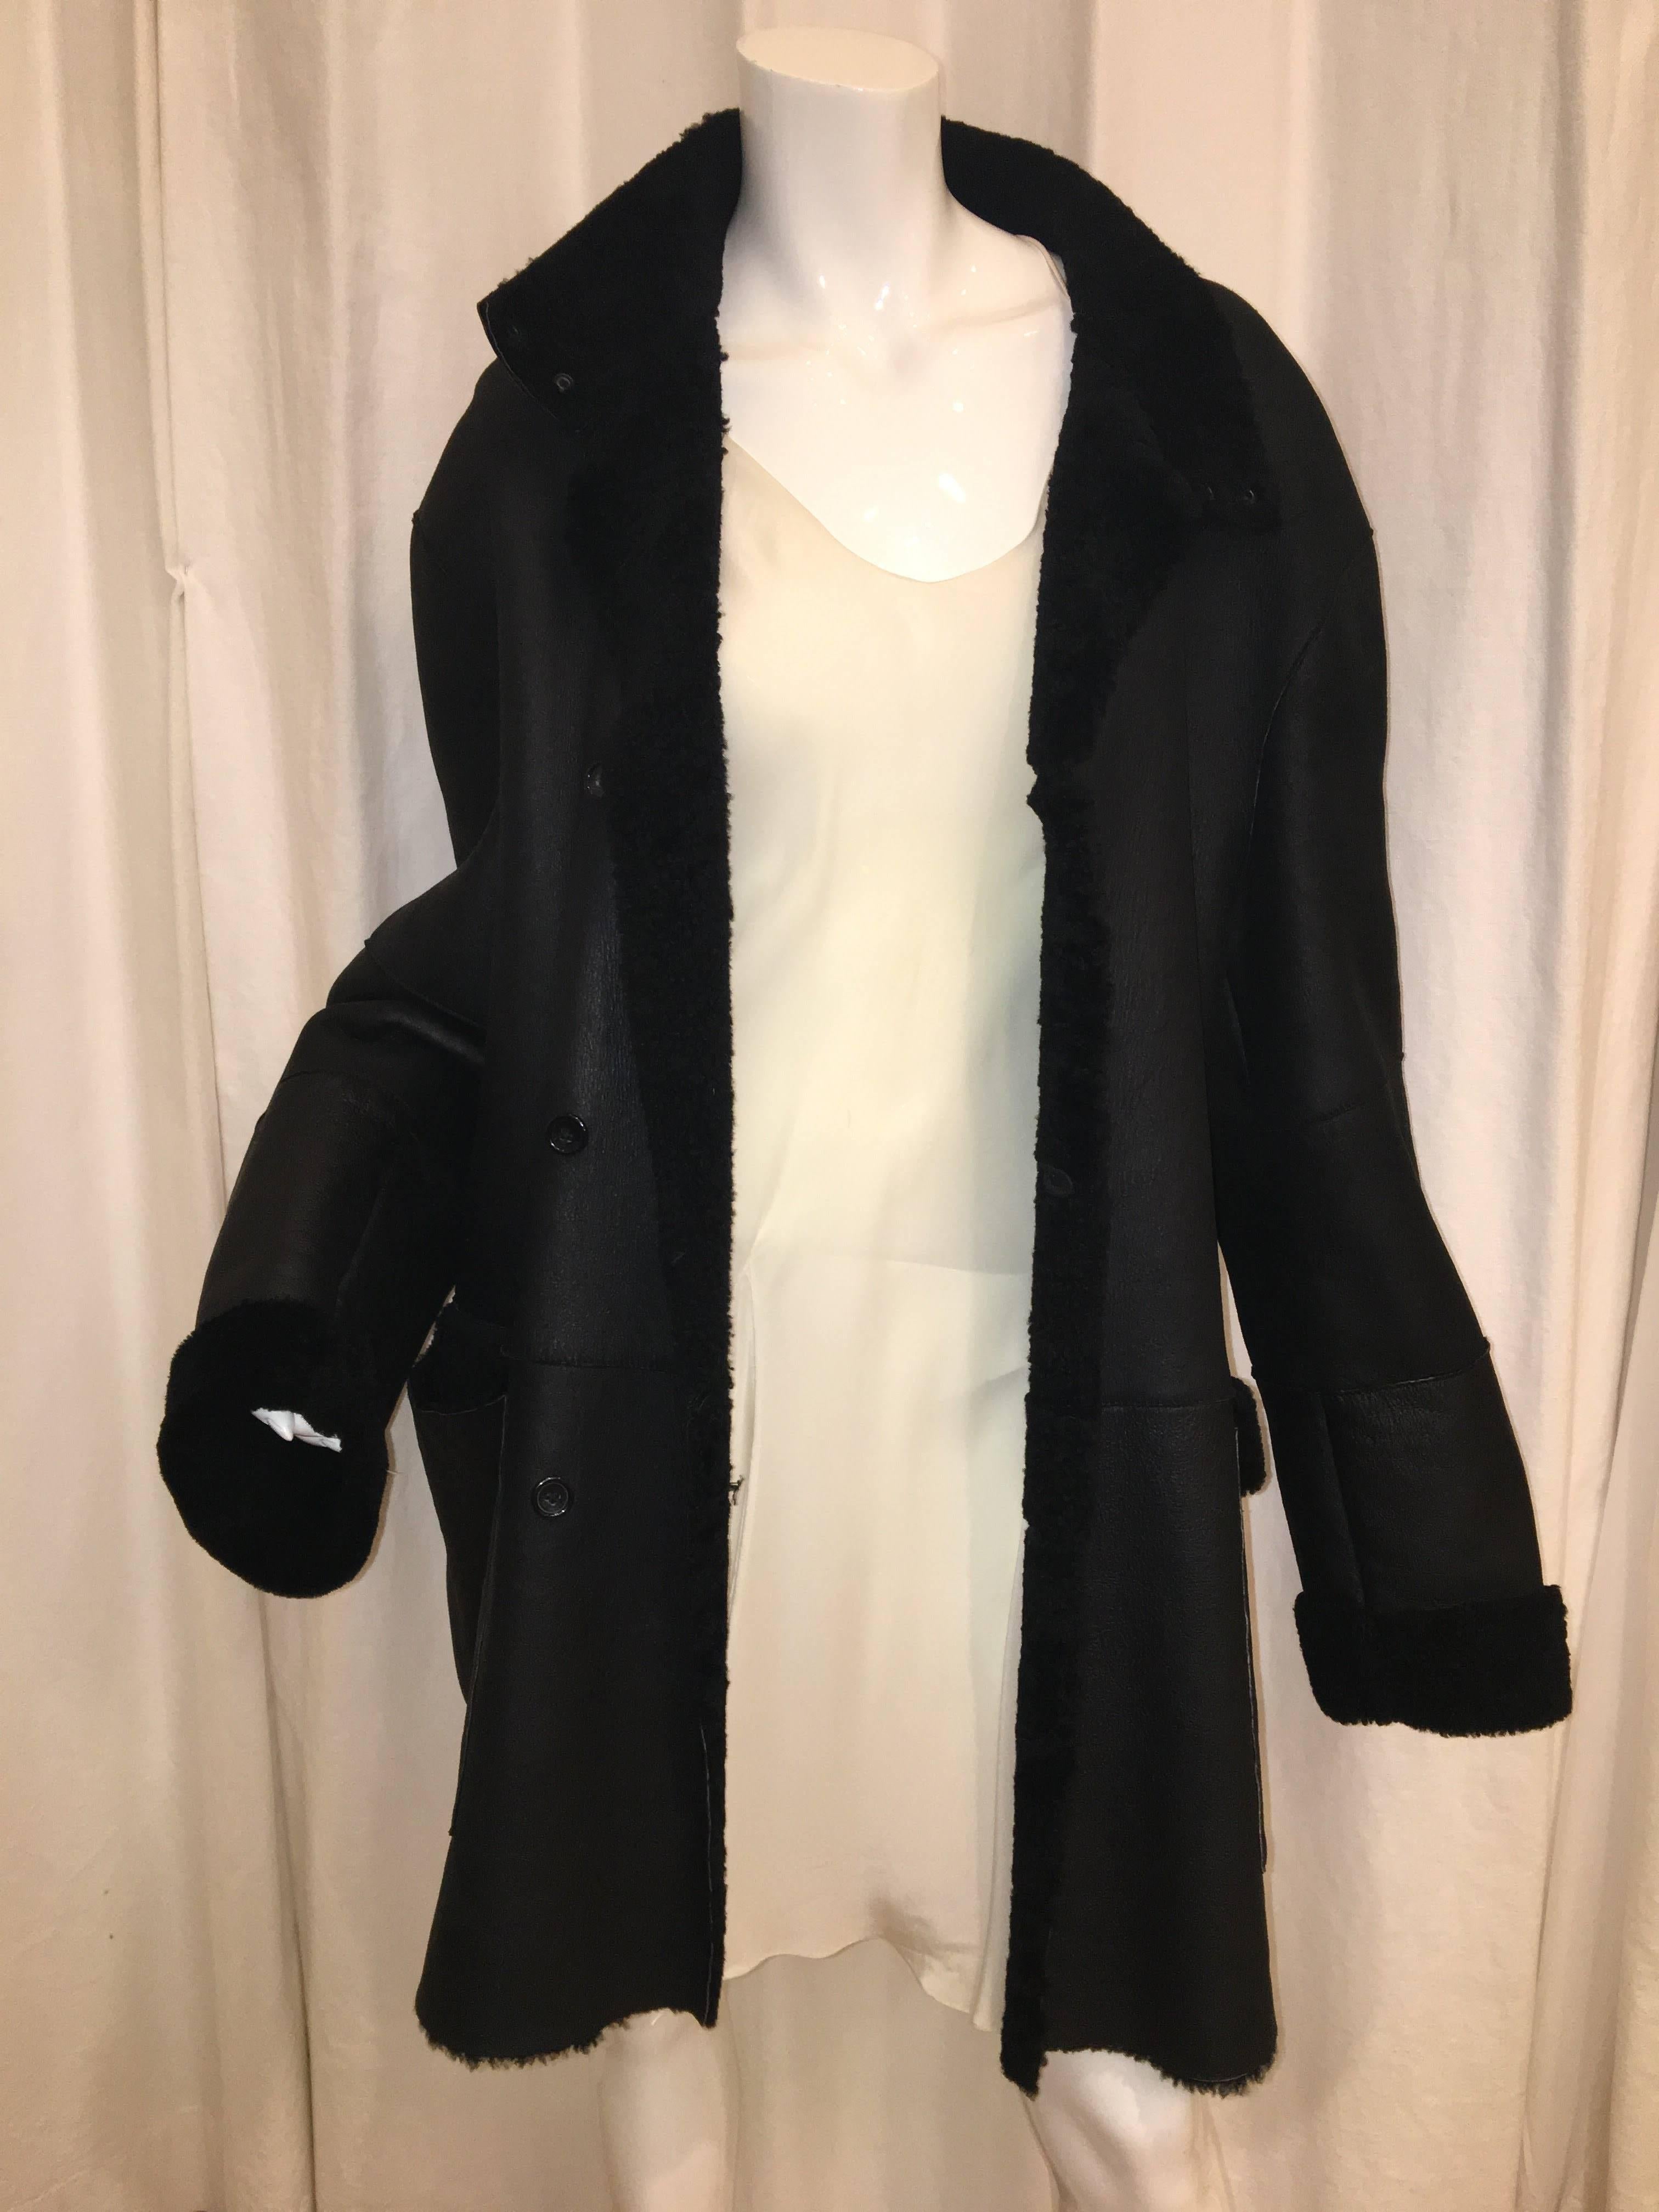 Burberry Black Leather with Shearling Lining Coat. 3 Button Front with Short Collar. 